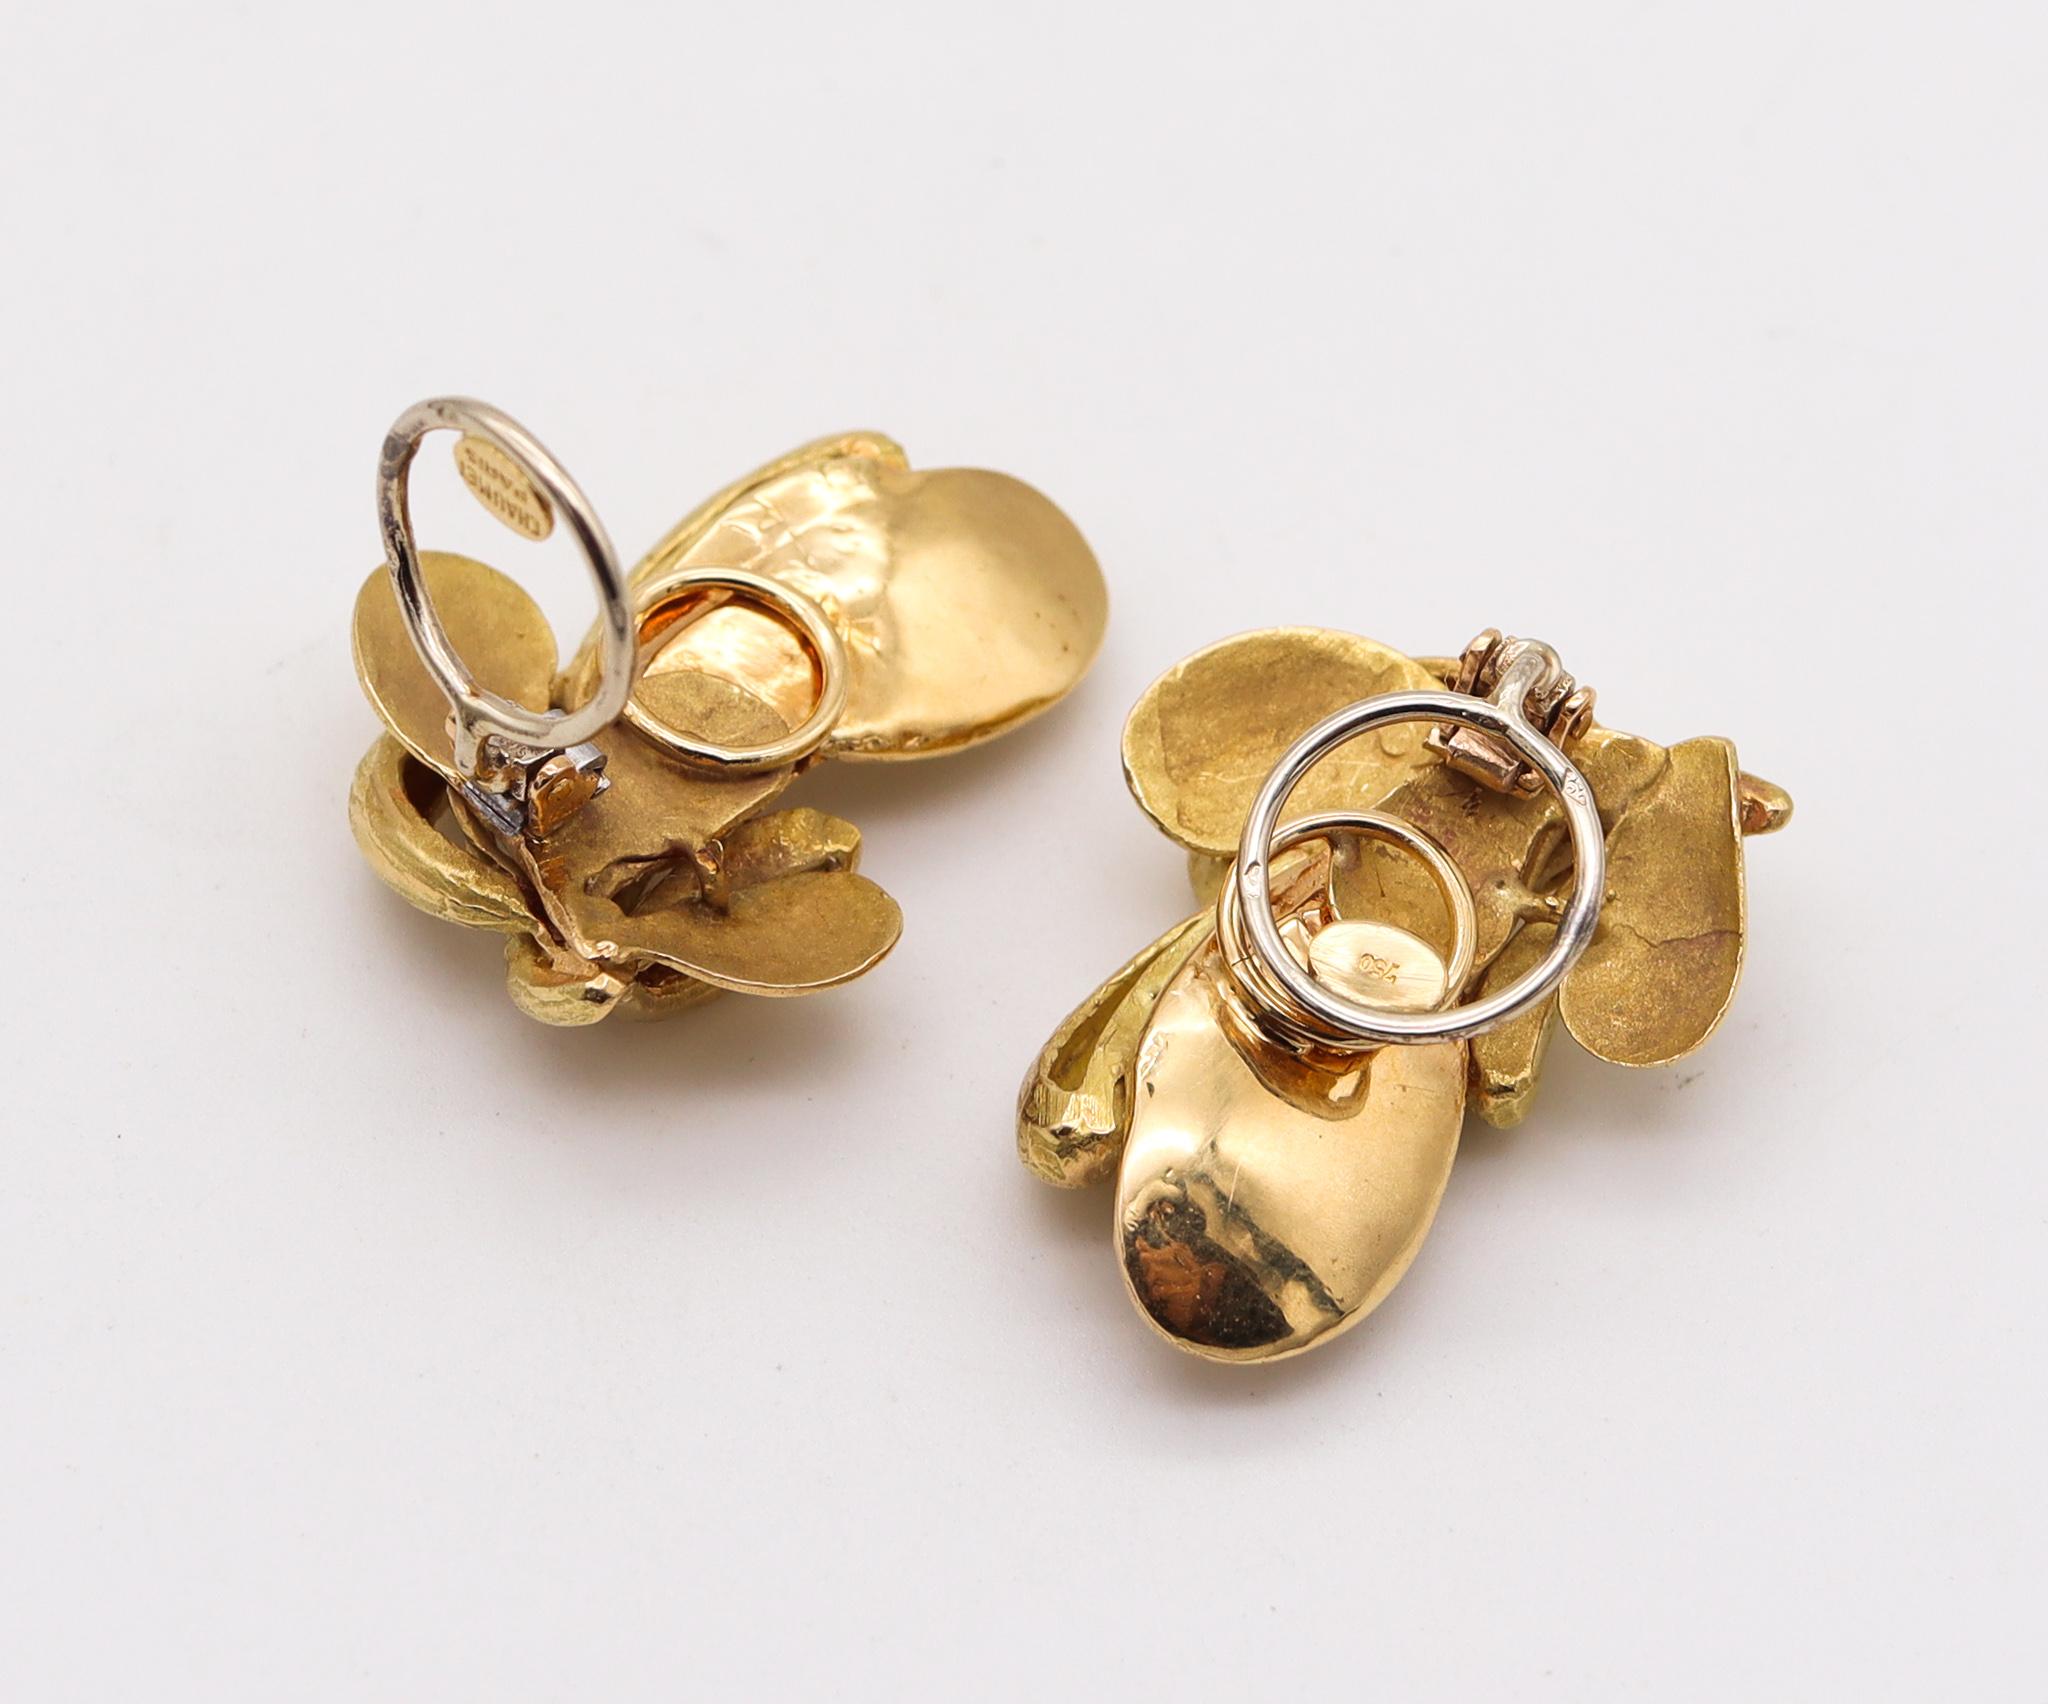 Women's Chaumet Paris 1970 Retro Modernist Clip on Earrings in Solid 18kt Yellow Gold For Sale